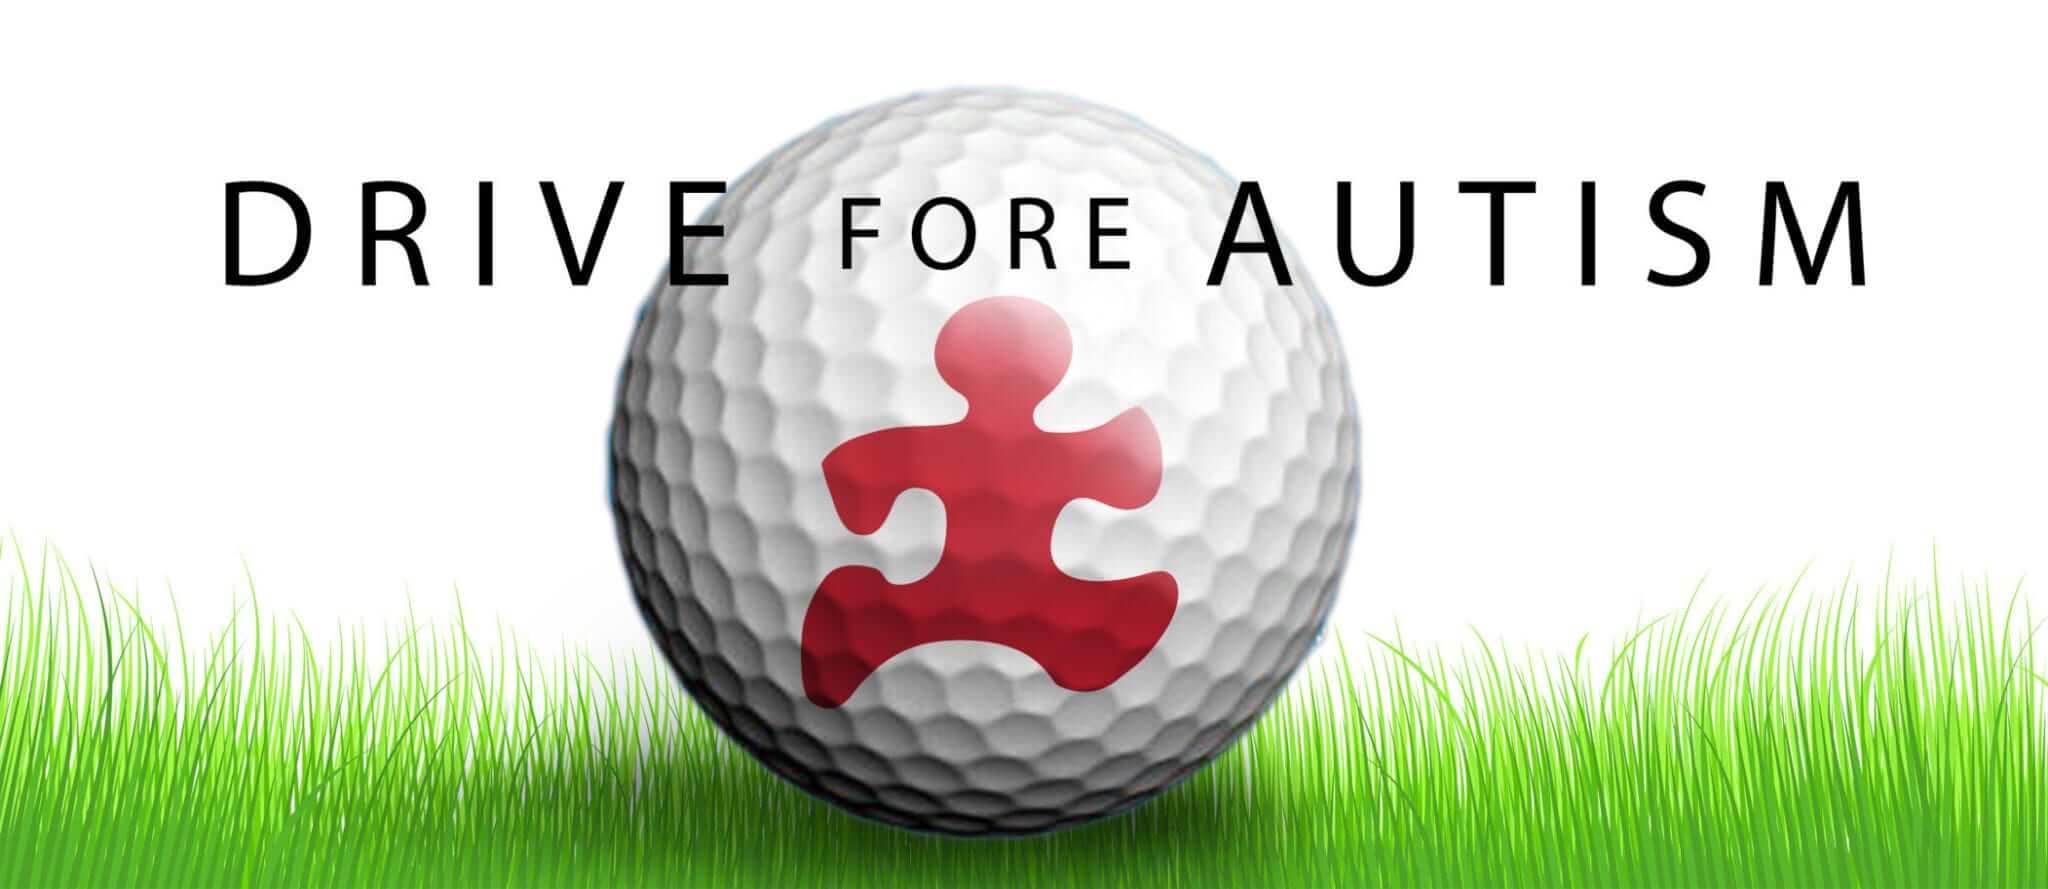 Drive Fore Autism - OKC